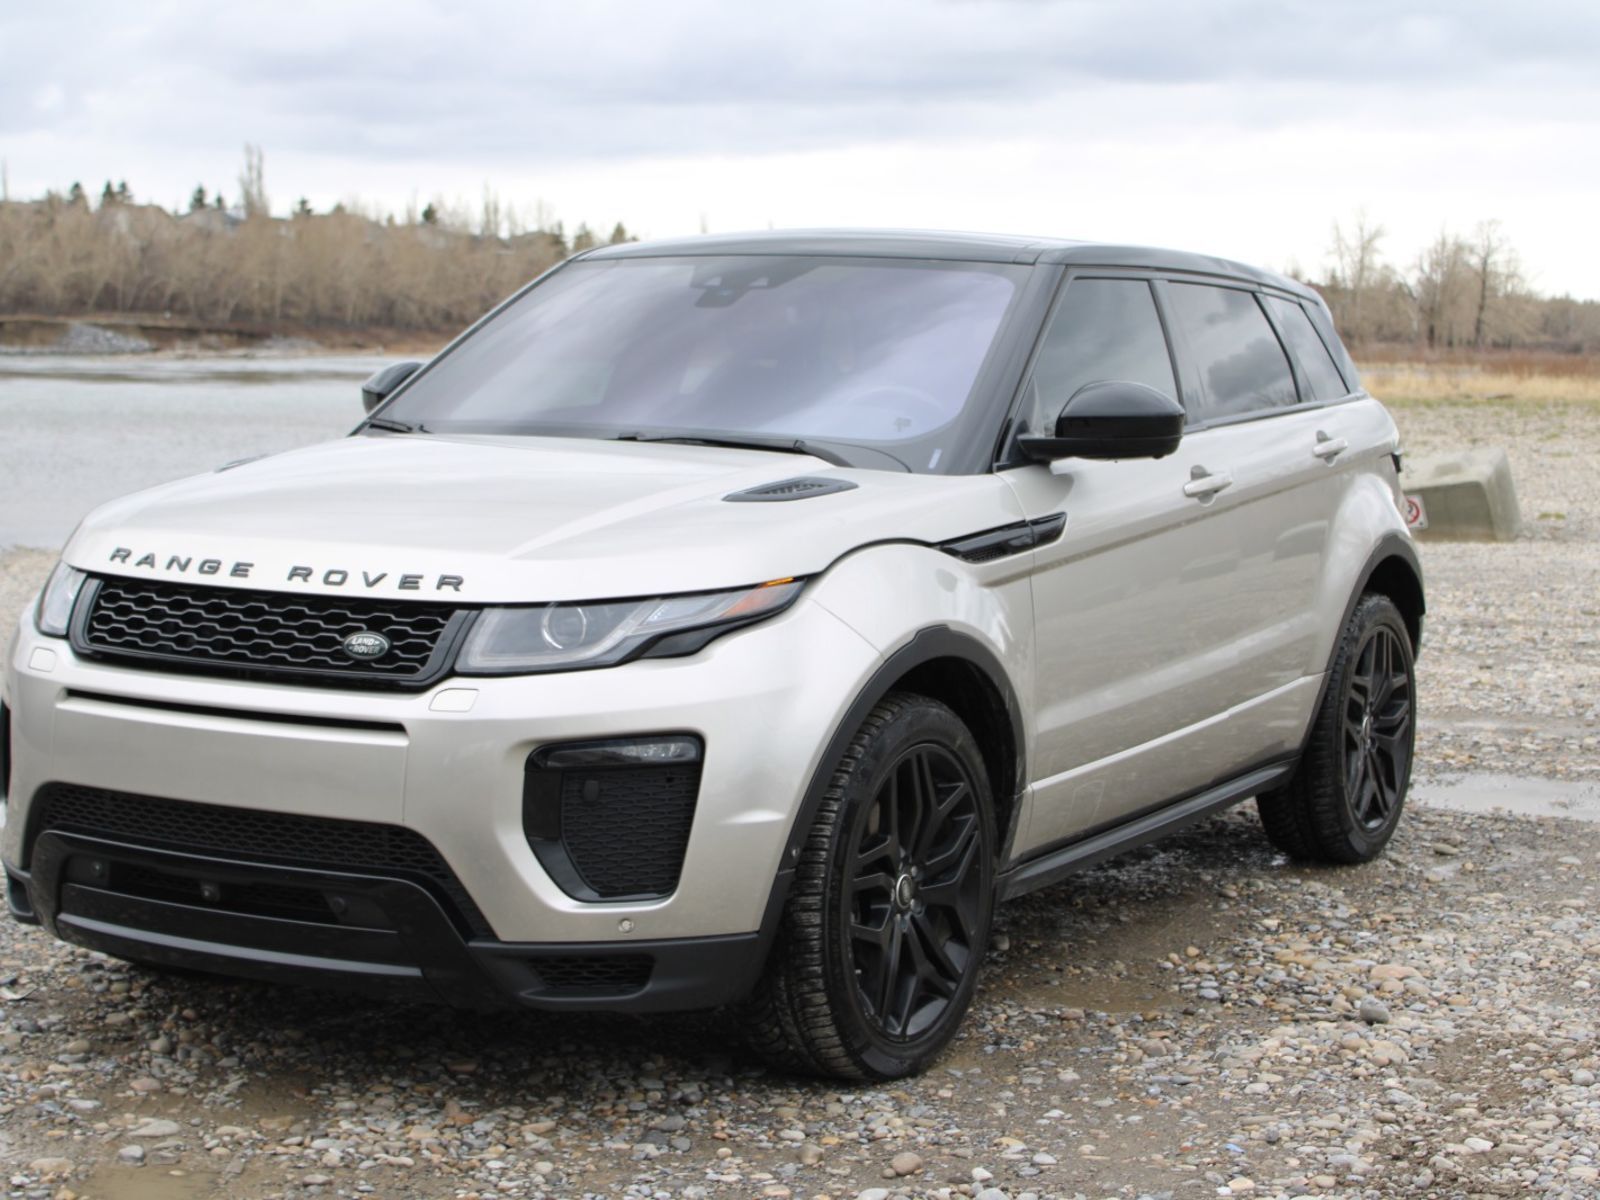 2017 Land Rover Range Rover Evoque ONE OWNER - NEW FRONT BRAKES, UP TO DATE SERVICE!